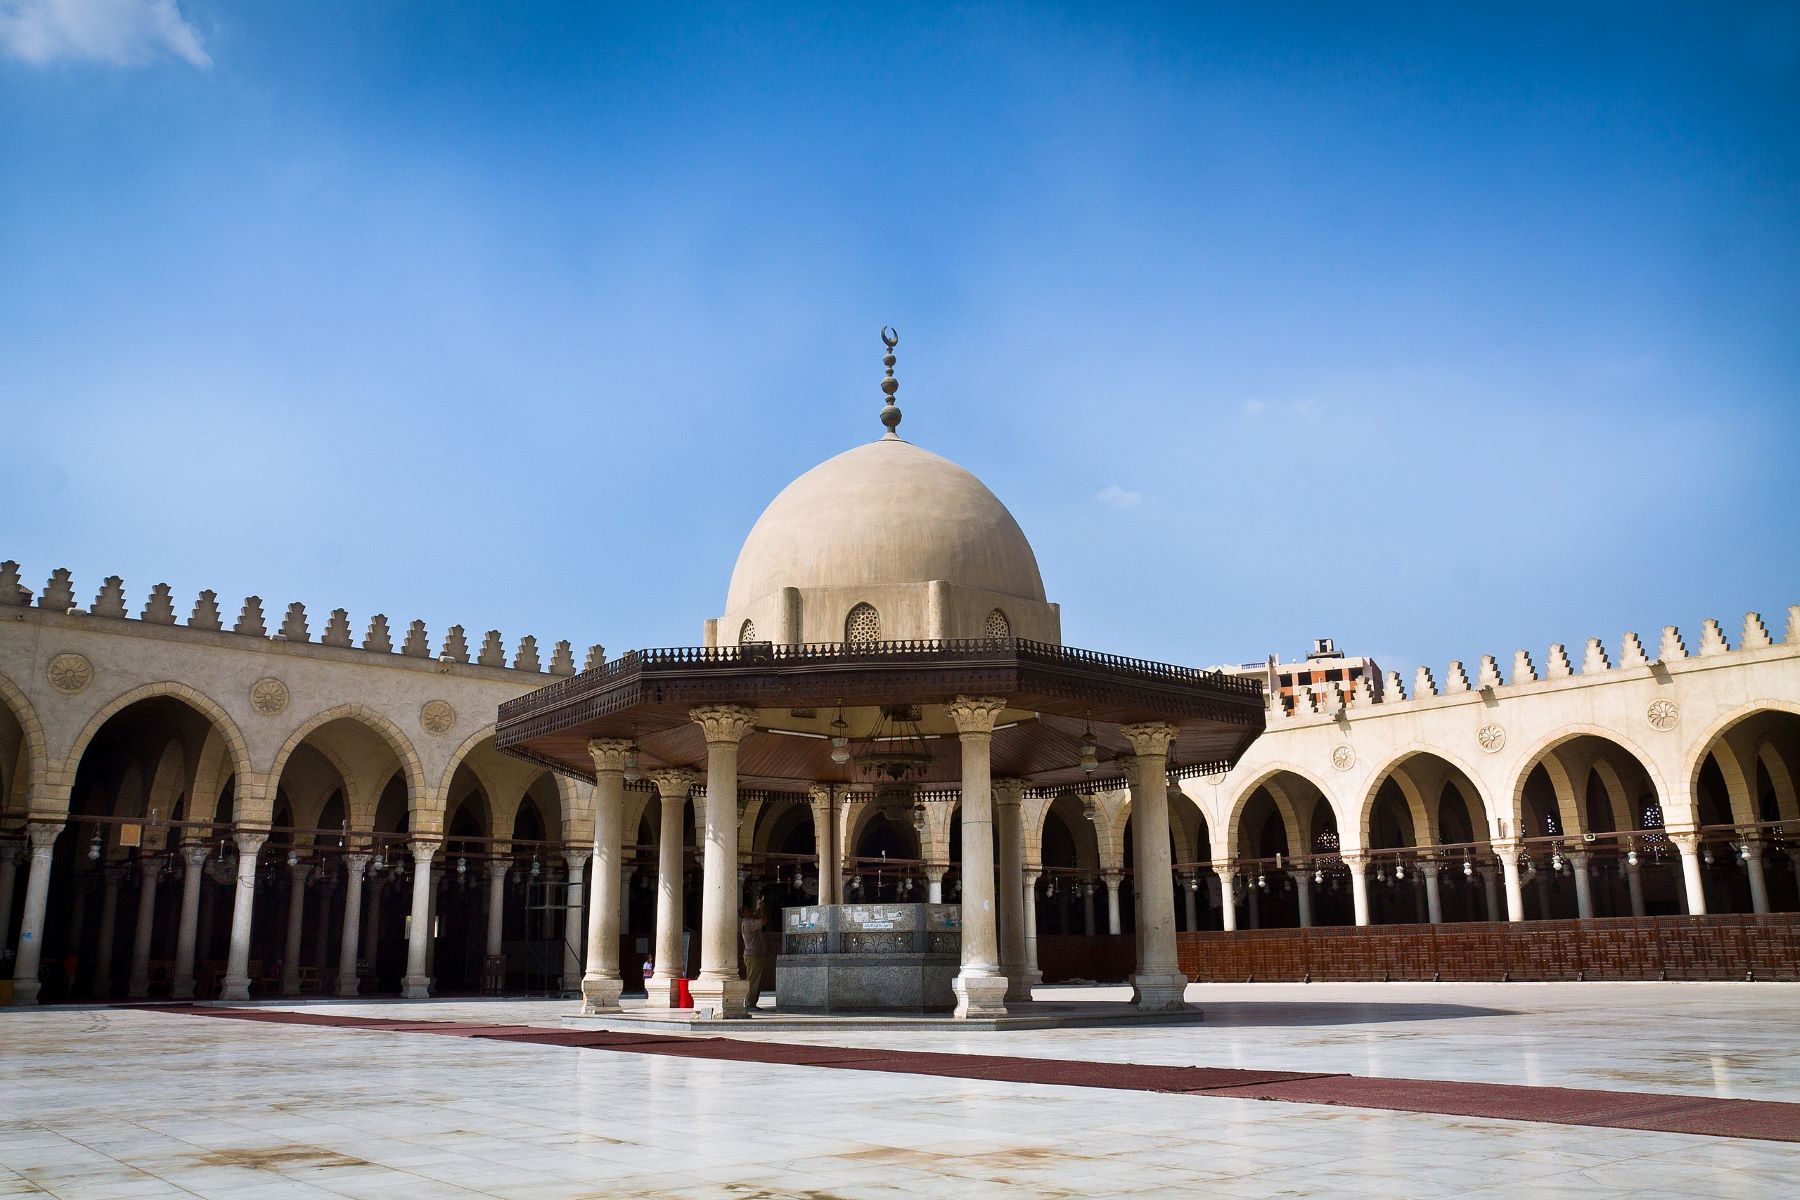 8-fascinating-facts-about-amr-ibn-al-as-mosque